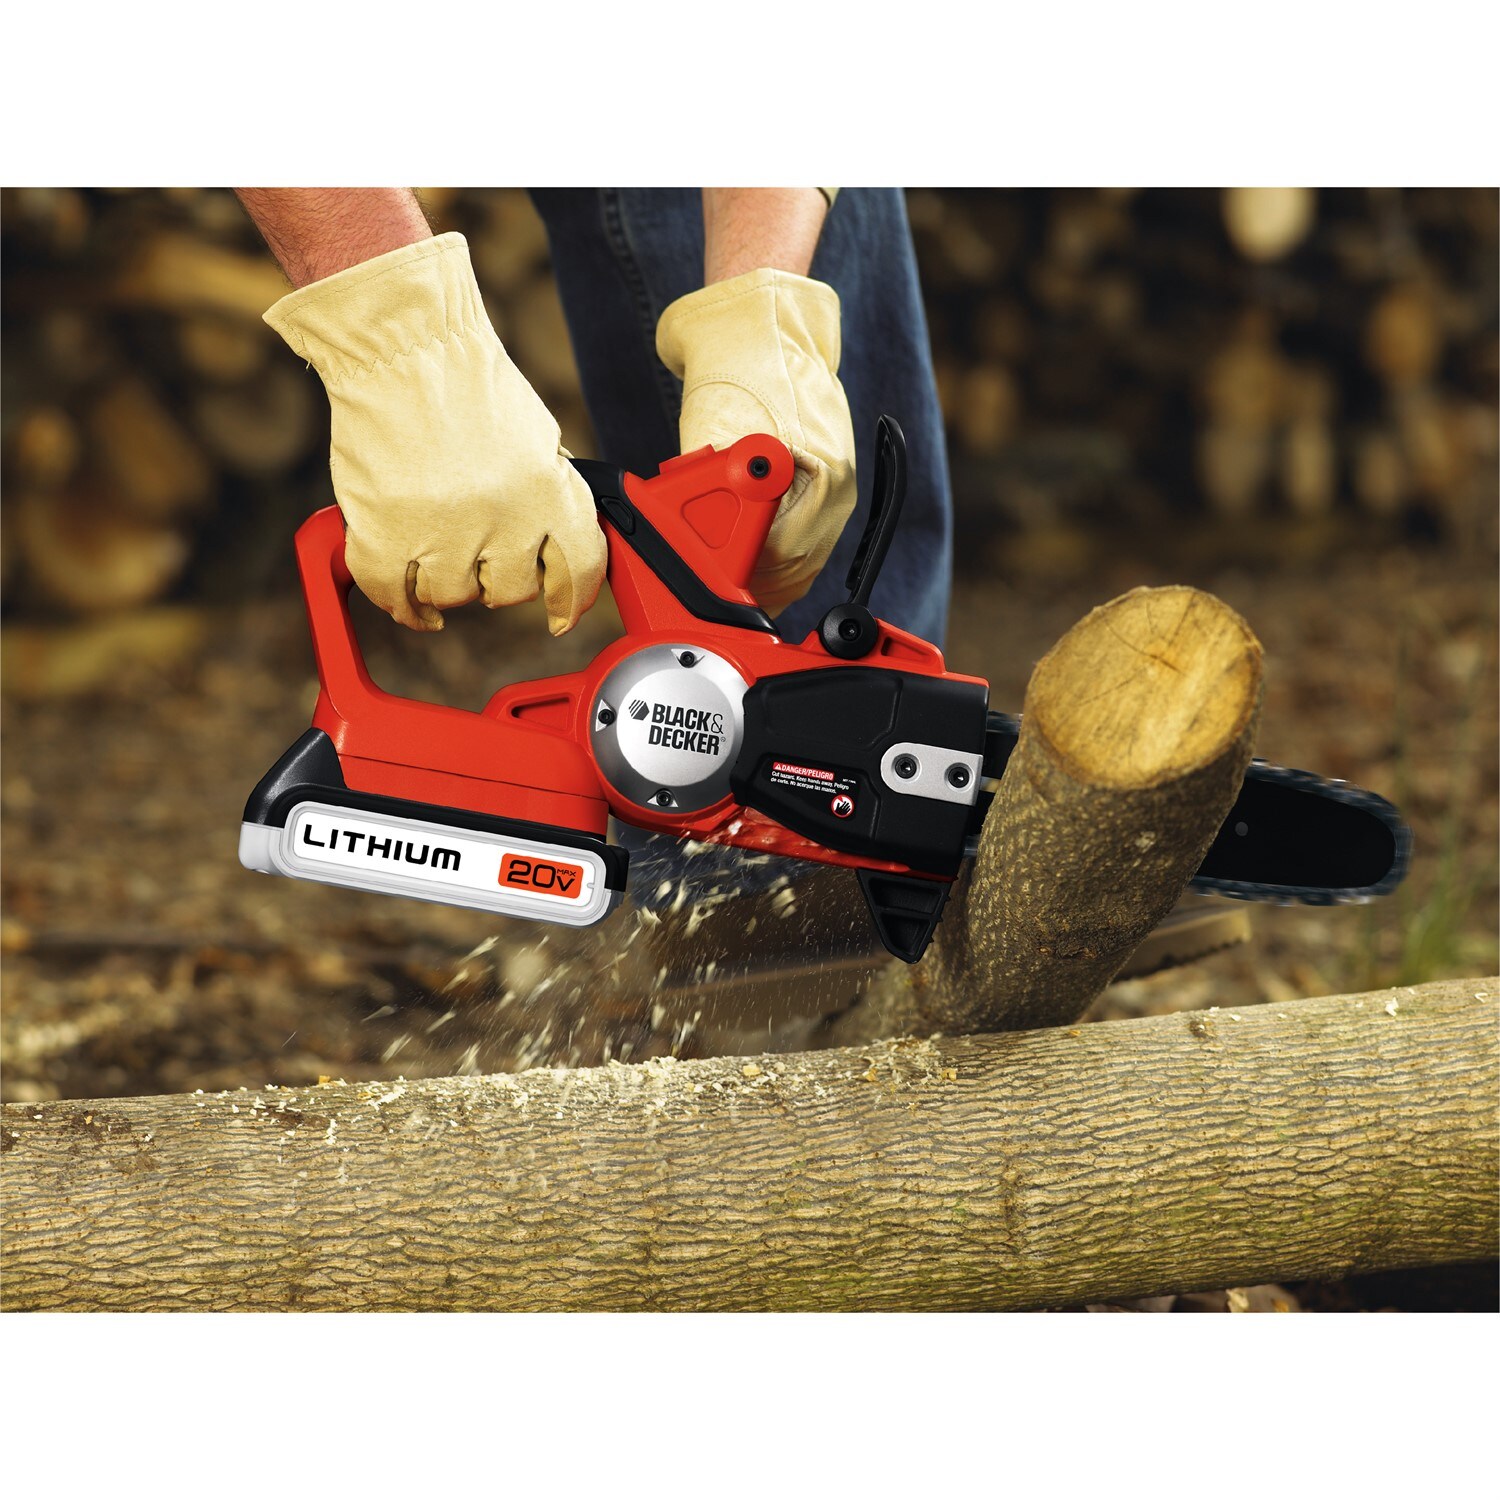 Black and Decker LCS120 - 20V Max Lithium Chainsaw Type 1 